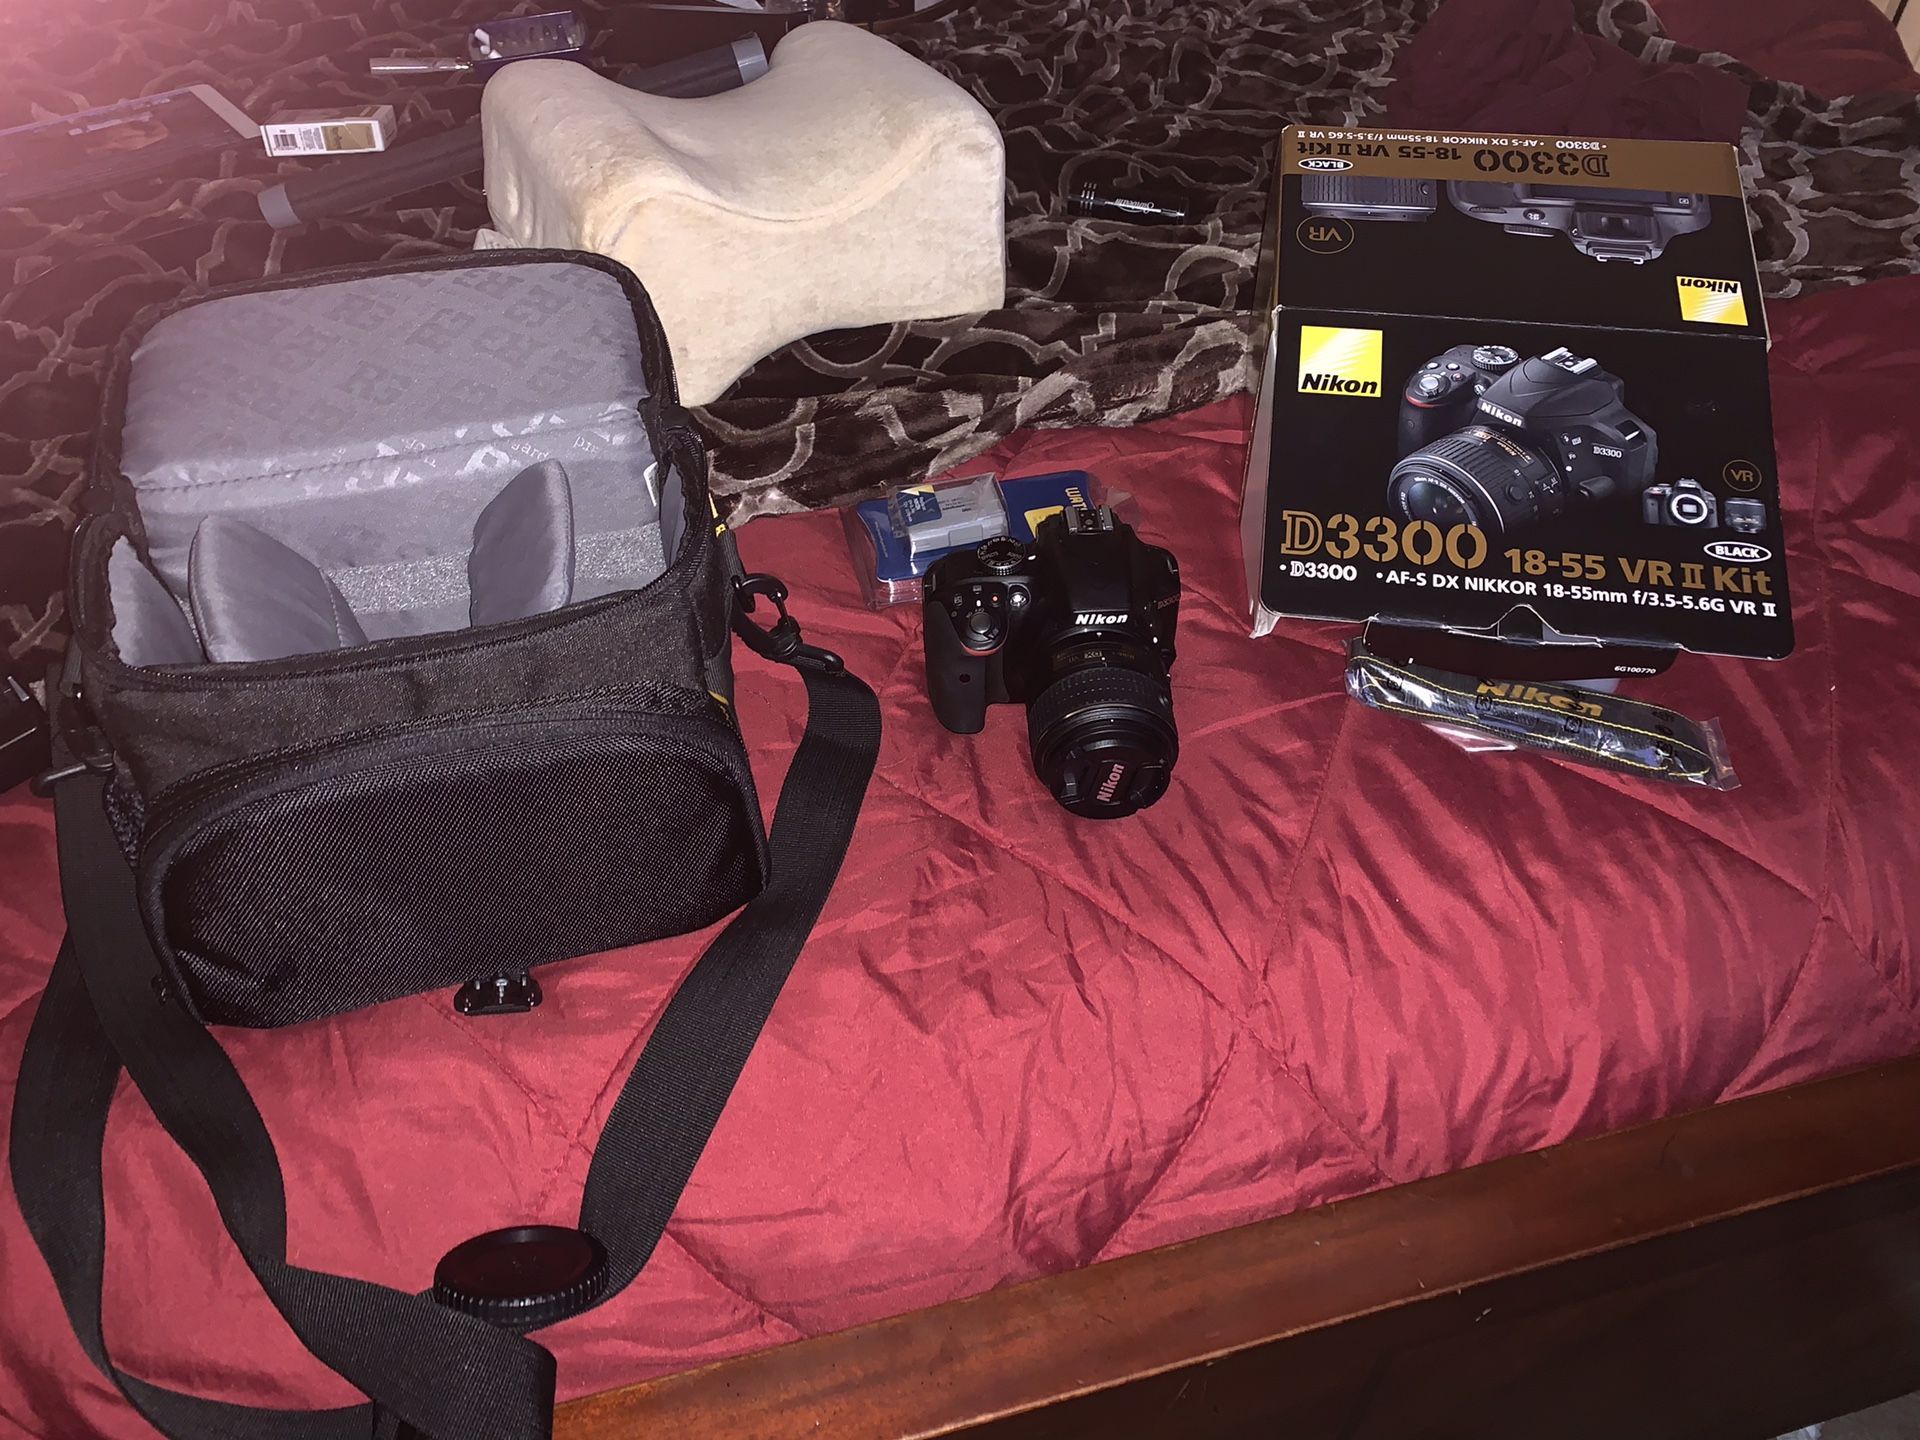 Nikon D3300 Digital Camera Kit. Mint Condition as it was only used twice.